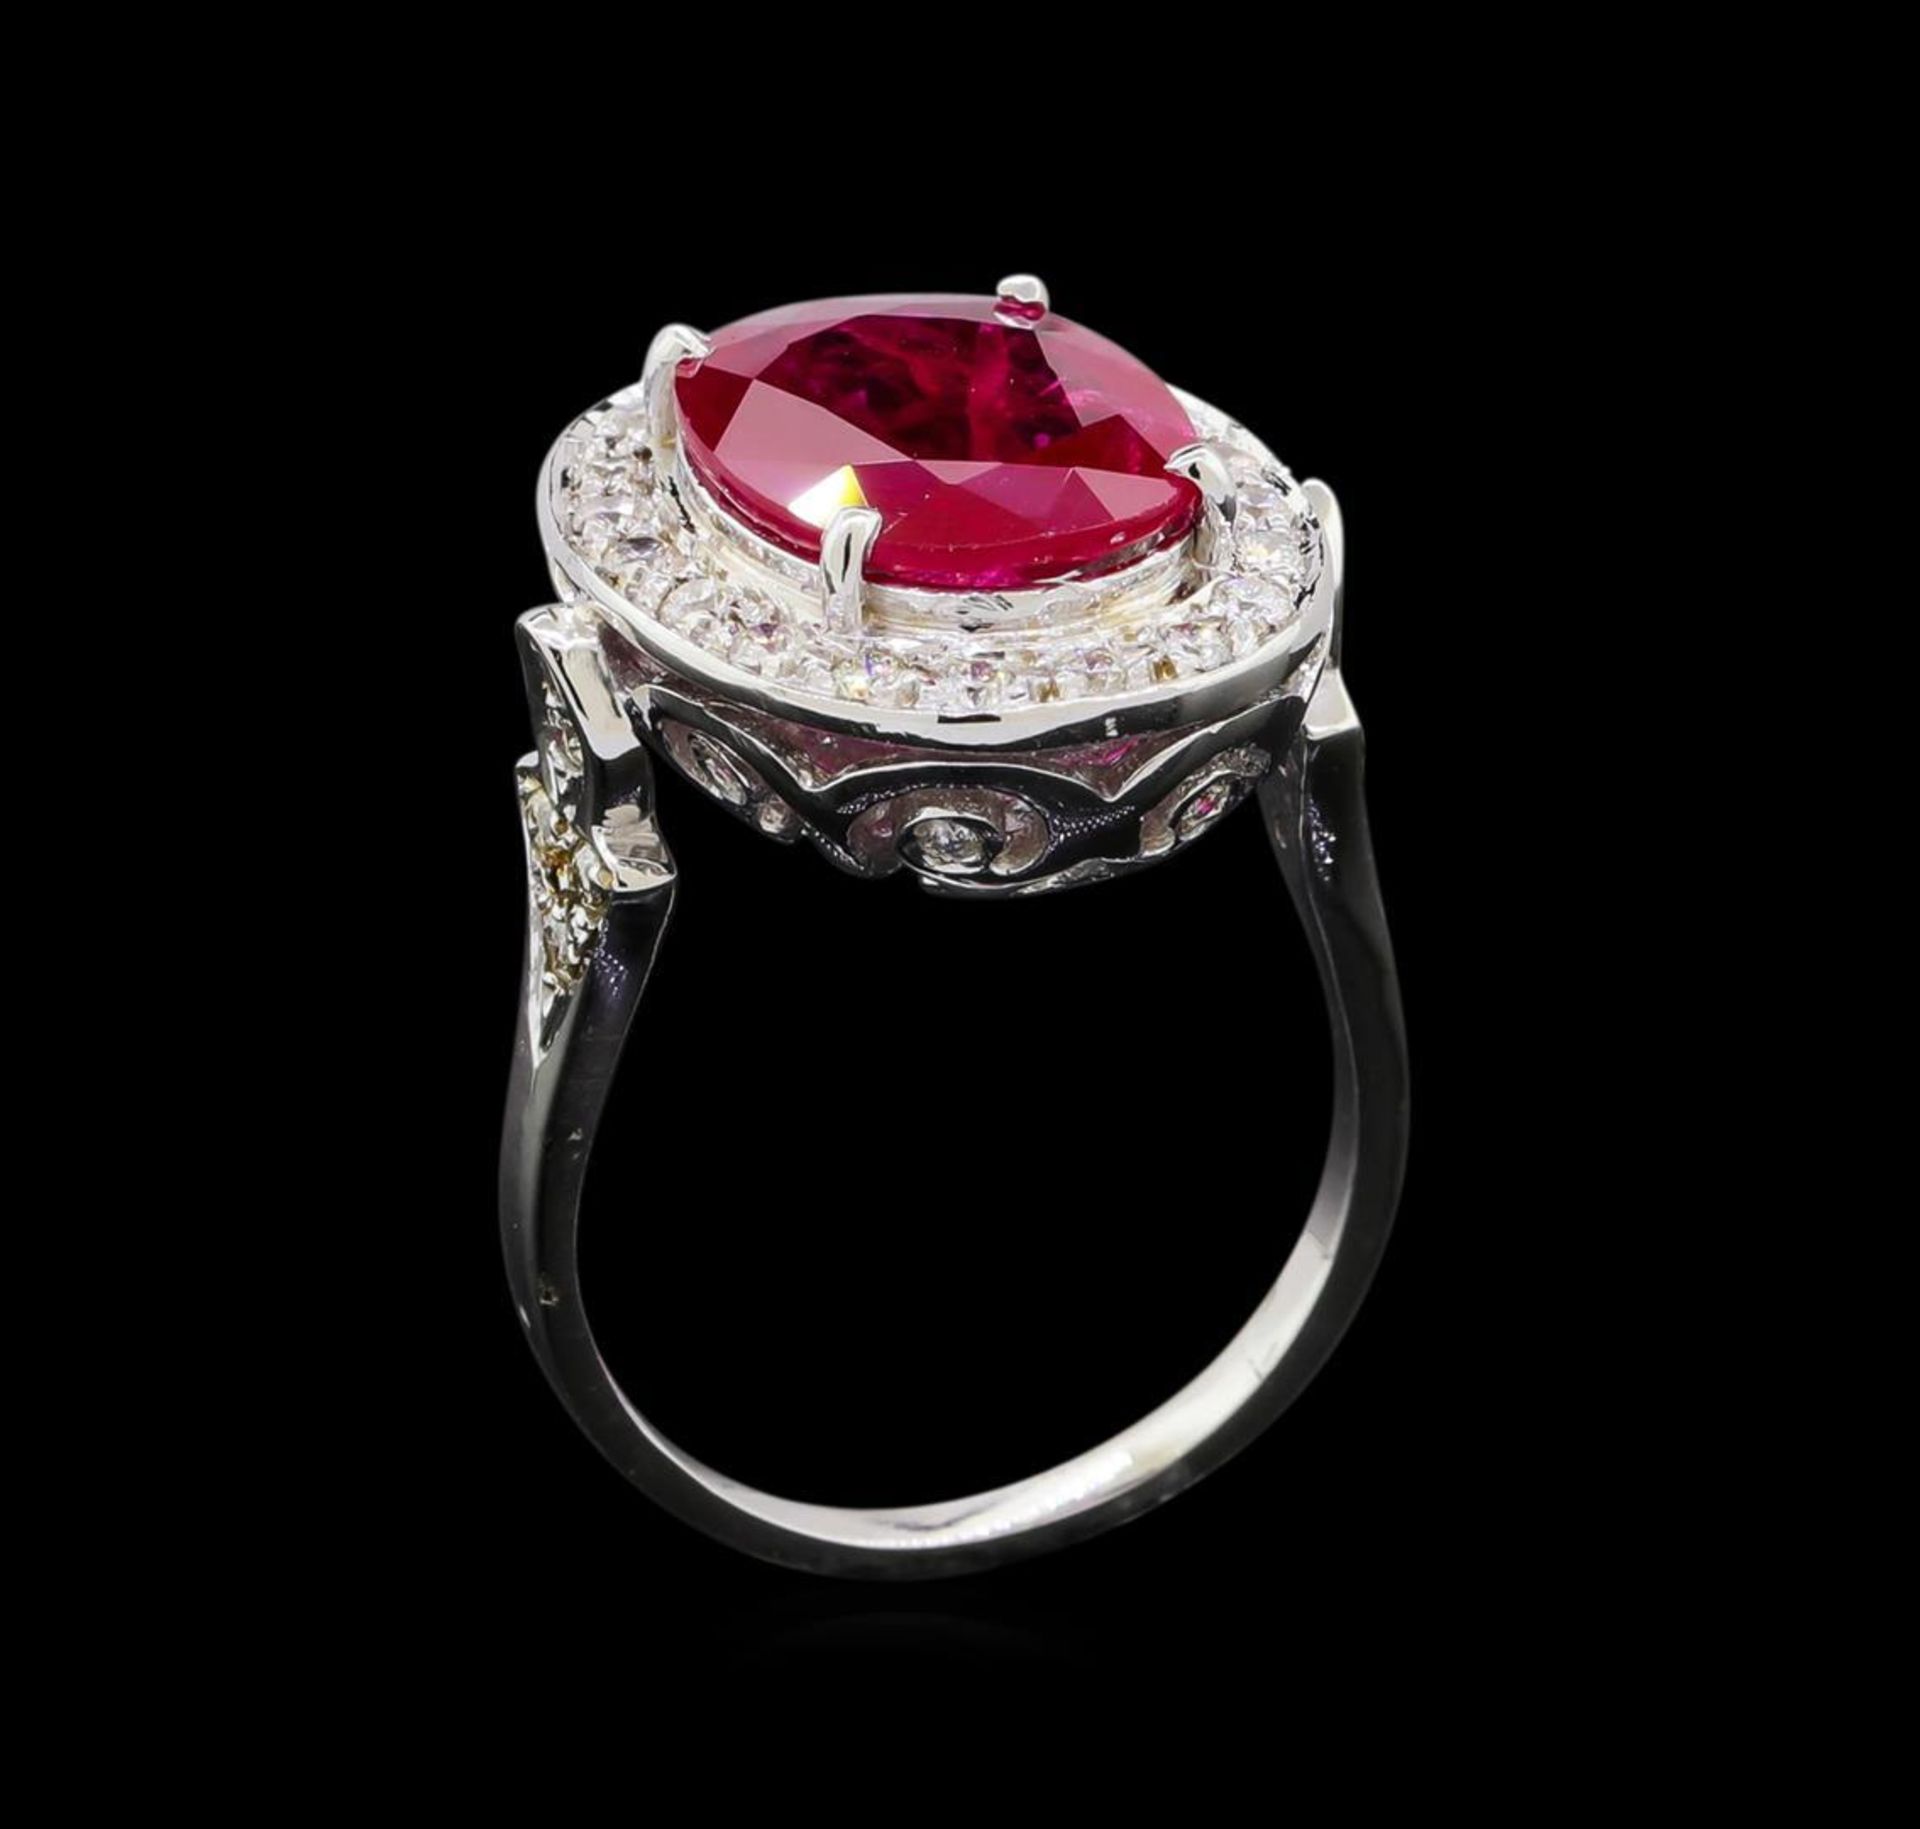 GIA Cert 4.07 ctw Ruby and Diamond Ring - 14KT White Gold - Image 4 of 6